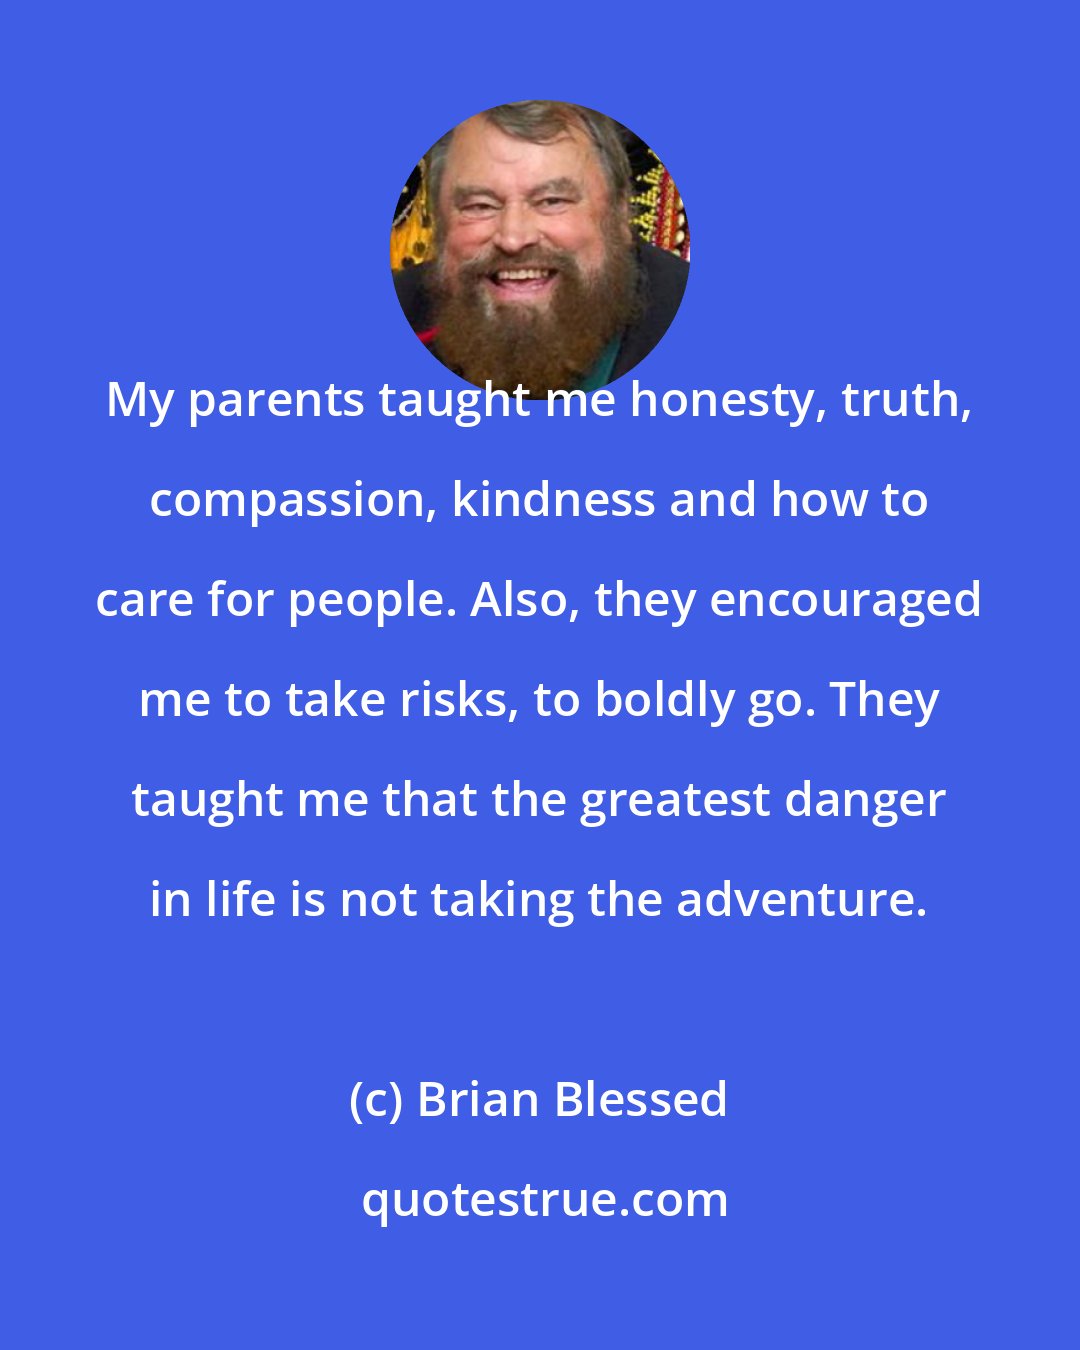 Brian Blessed: My parents taught me honesty, truth, compassion, kindness and how to care for people. Also, they encouraged me to take risks, to boldly go. They taught me that the greatest danger in life is not taking the adventure.